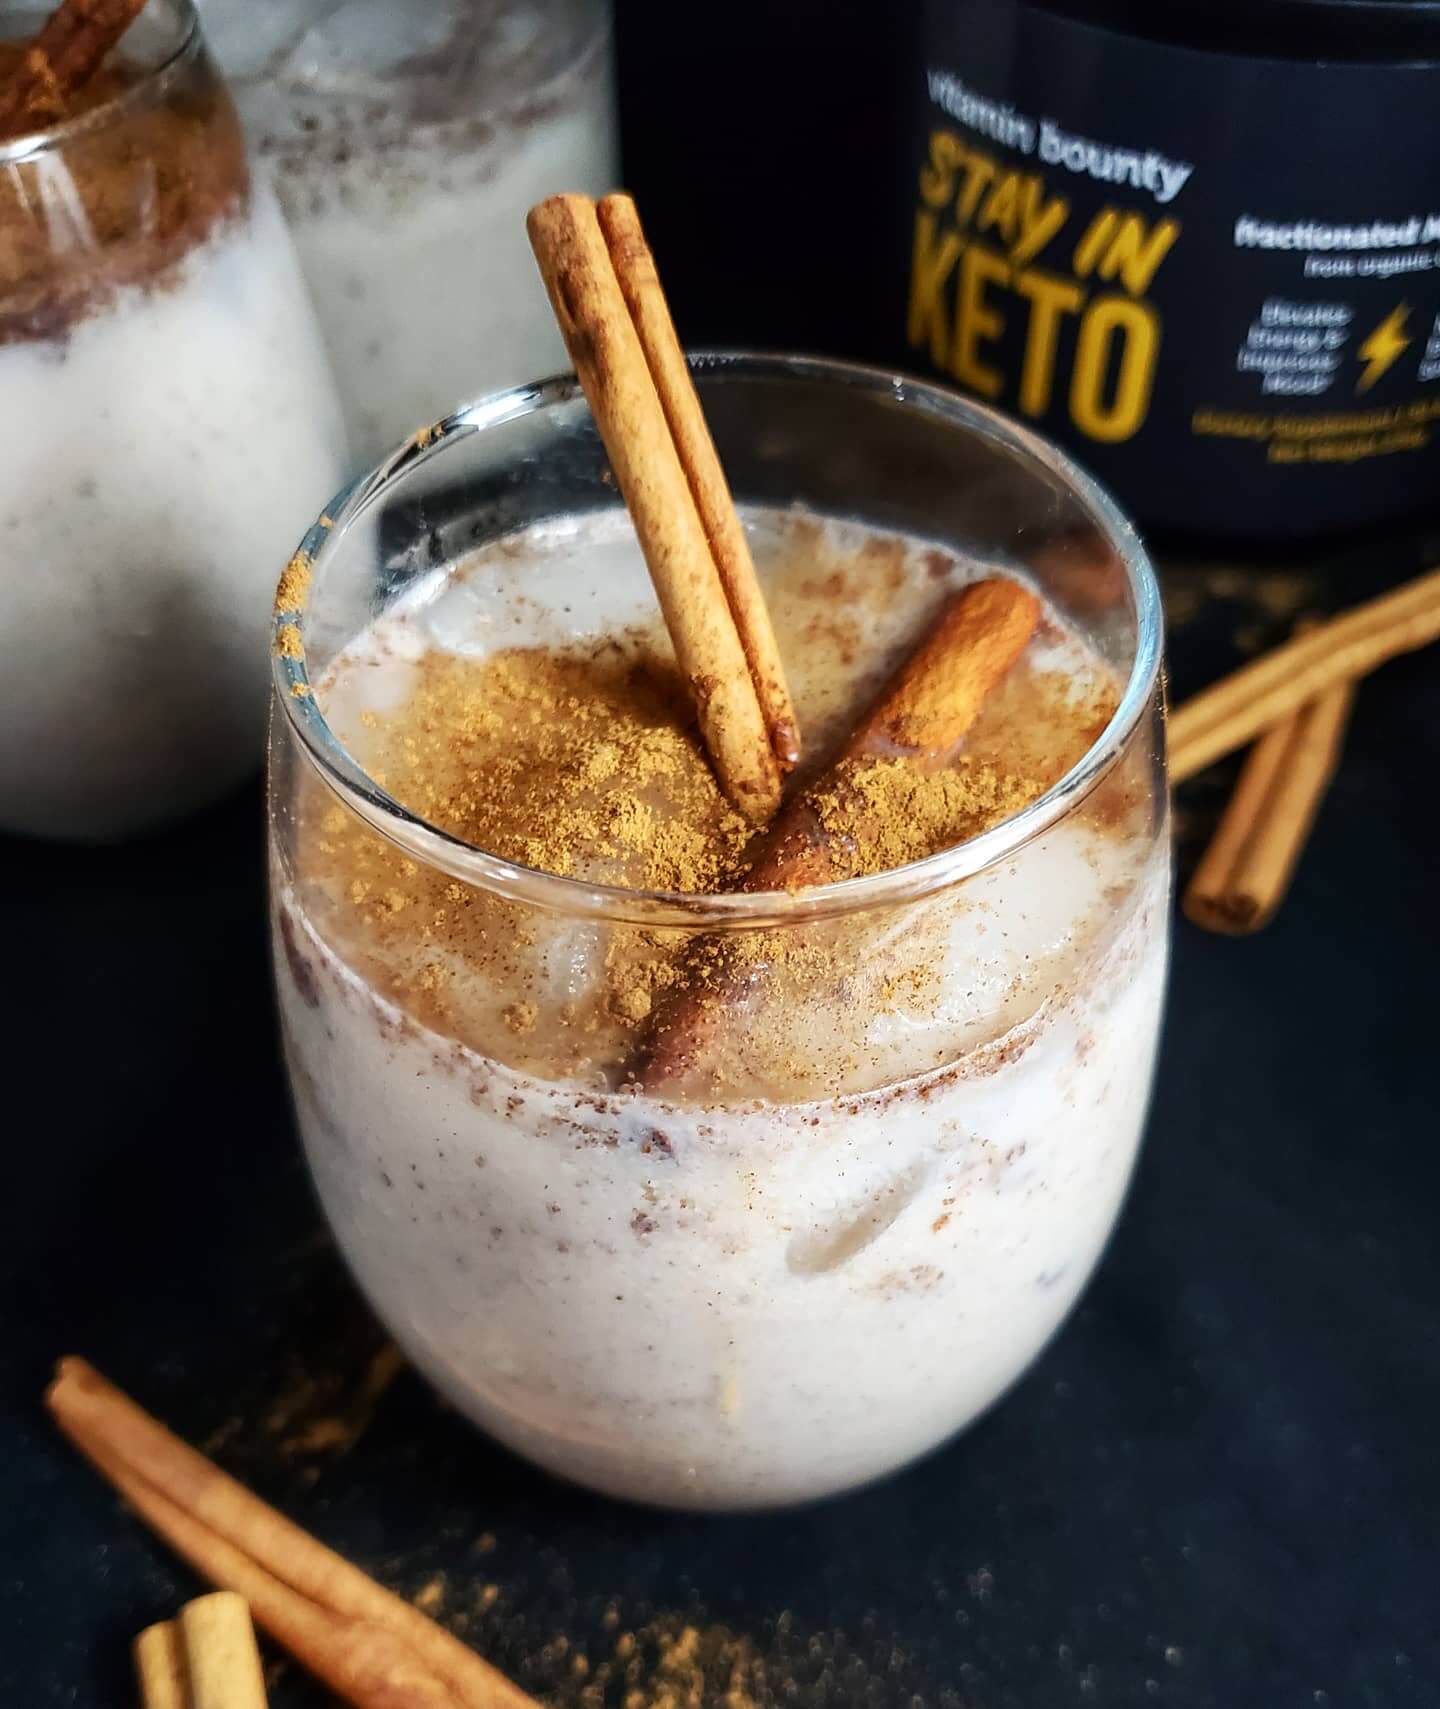 Horchata in round glass topped with cinnamon made with Stay in Keto powder